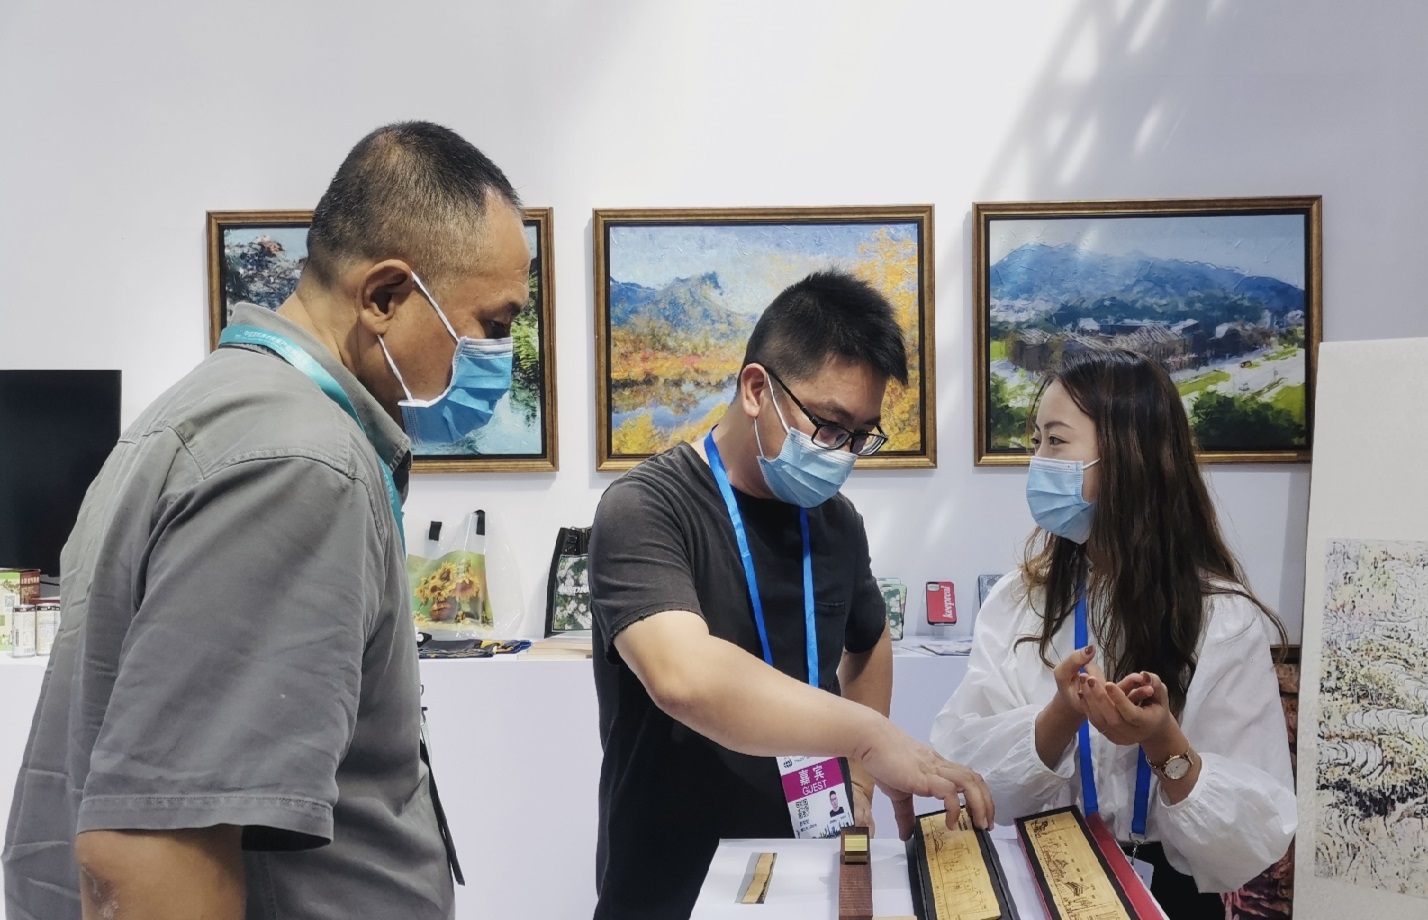 Be invited to attend the Guangzhou Fair in 2021, as a demonstration of the industrial development of eco-design at Conghua Pavilion